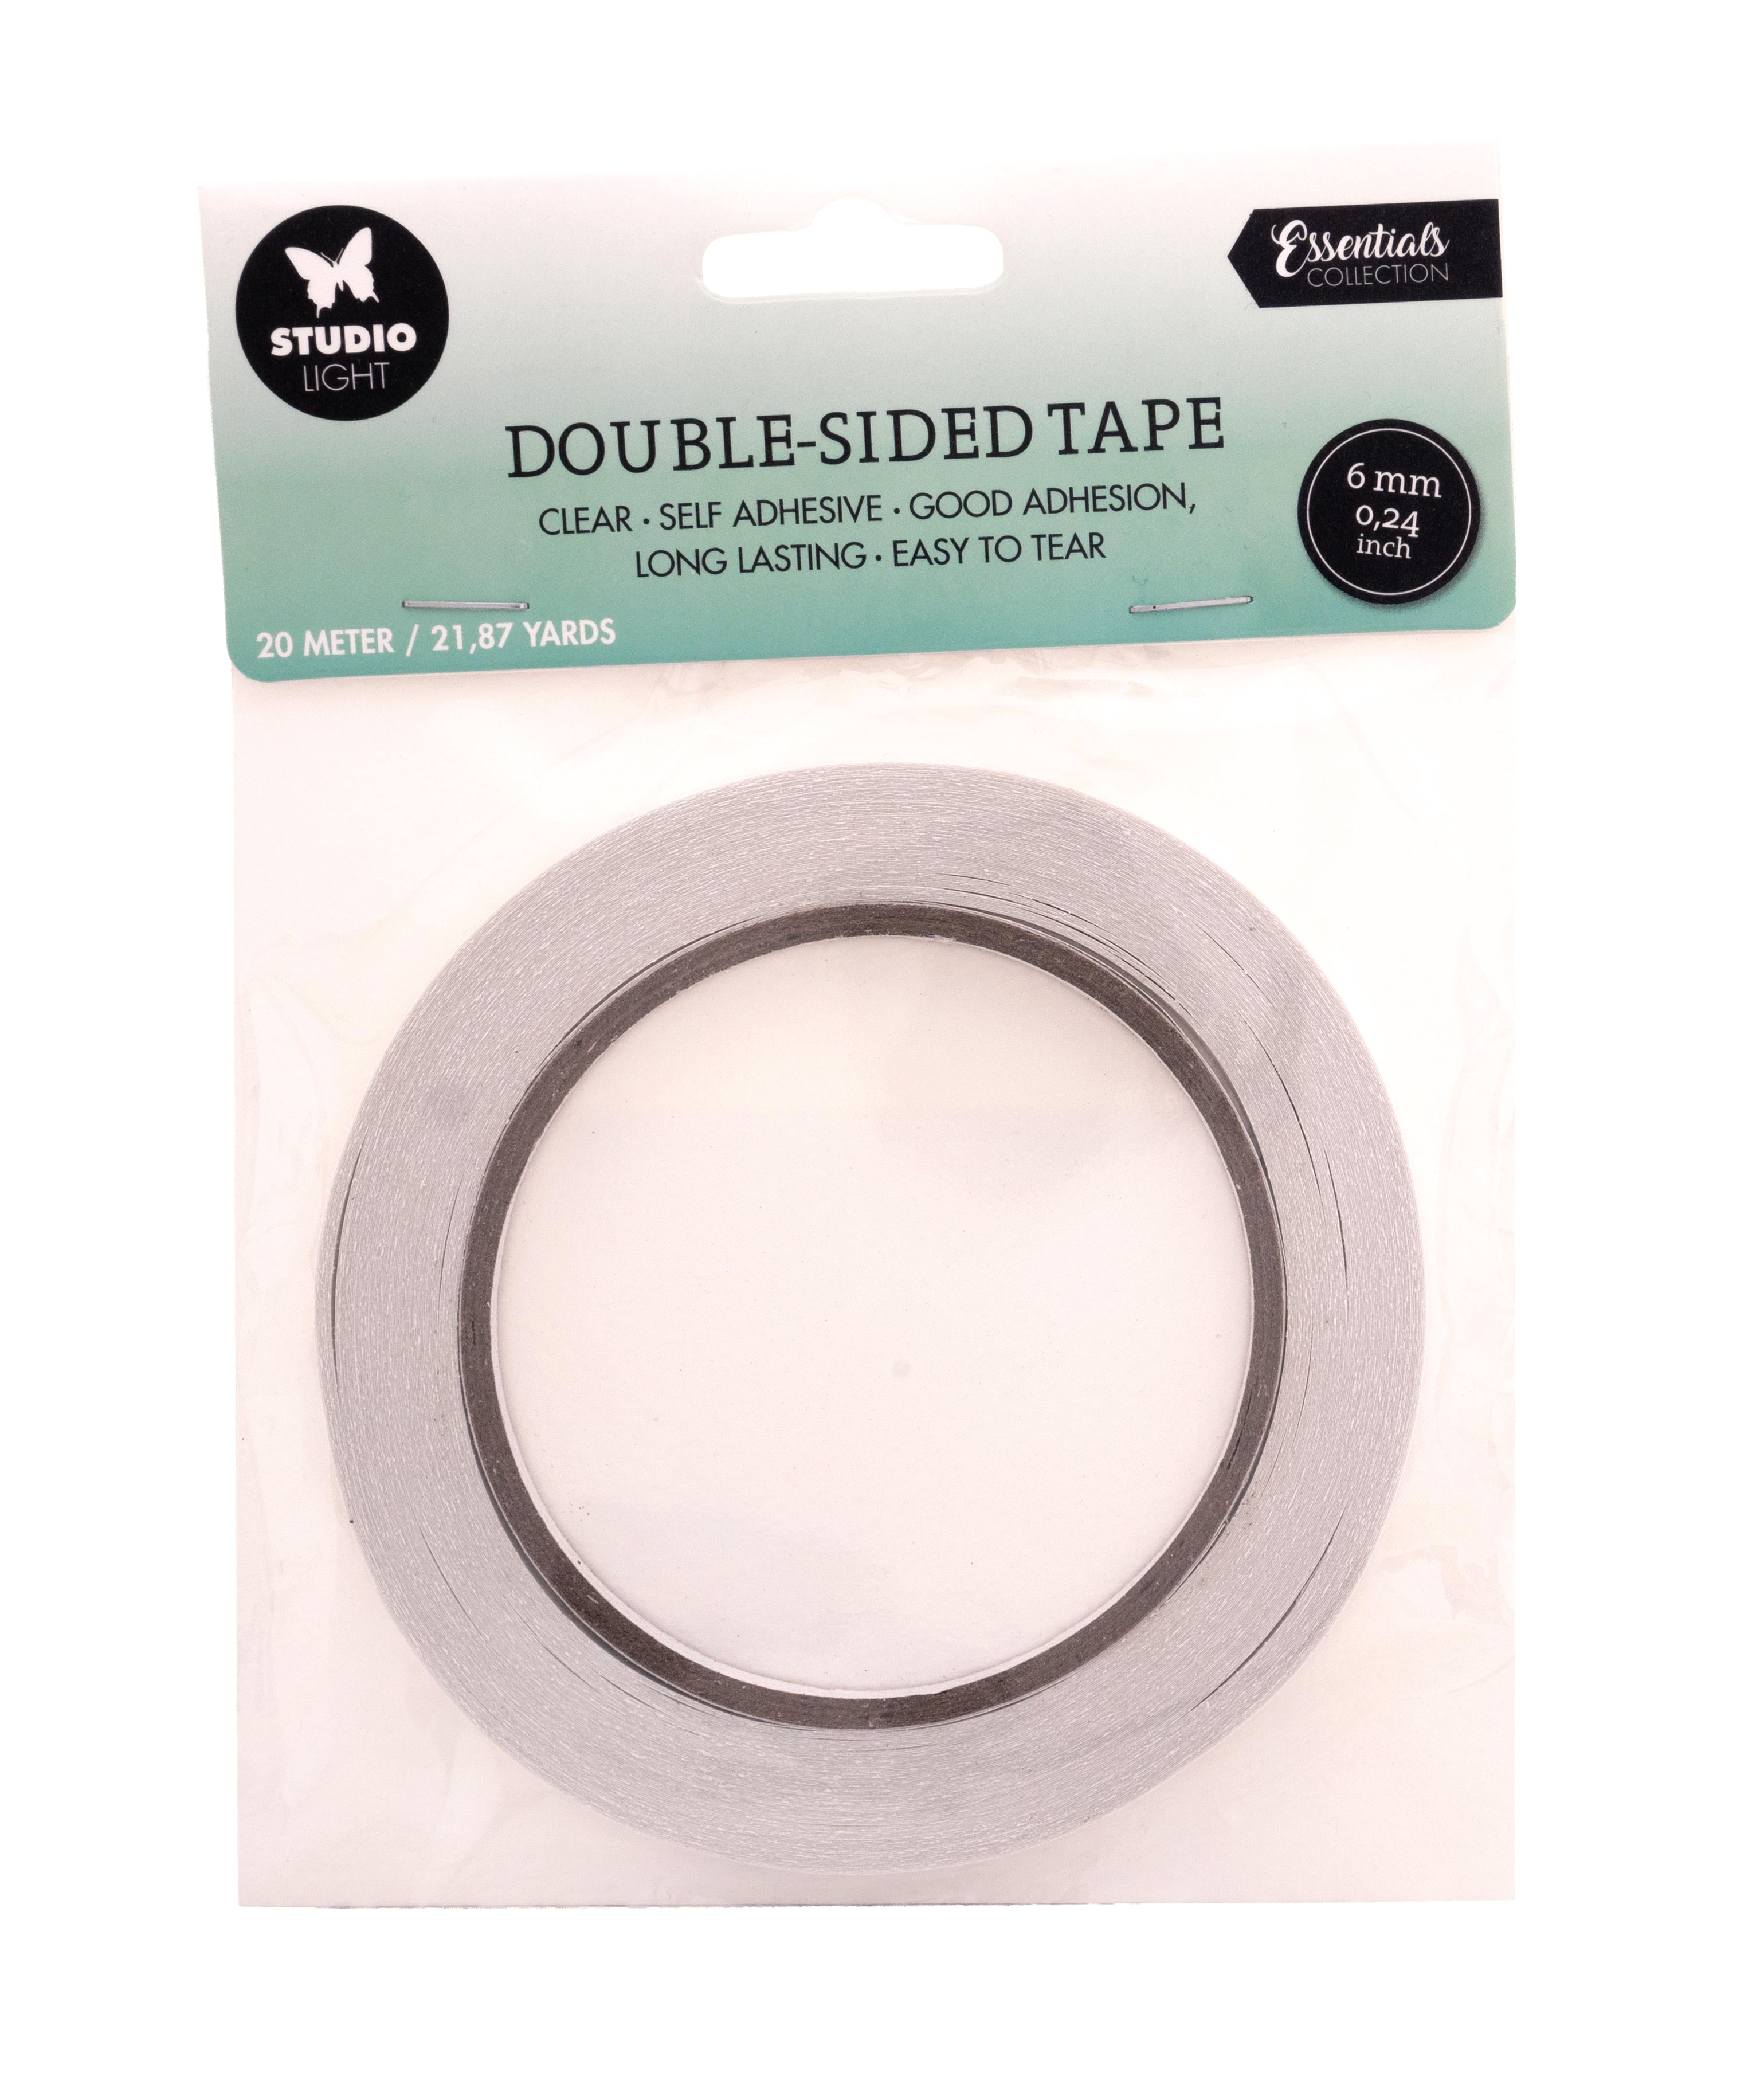 SL Doublesided Adhesive Tape Easy To Tear 6mm Essential Tools 165x130x6mm 20 M nr.02